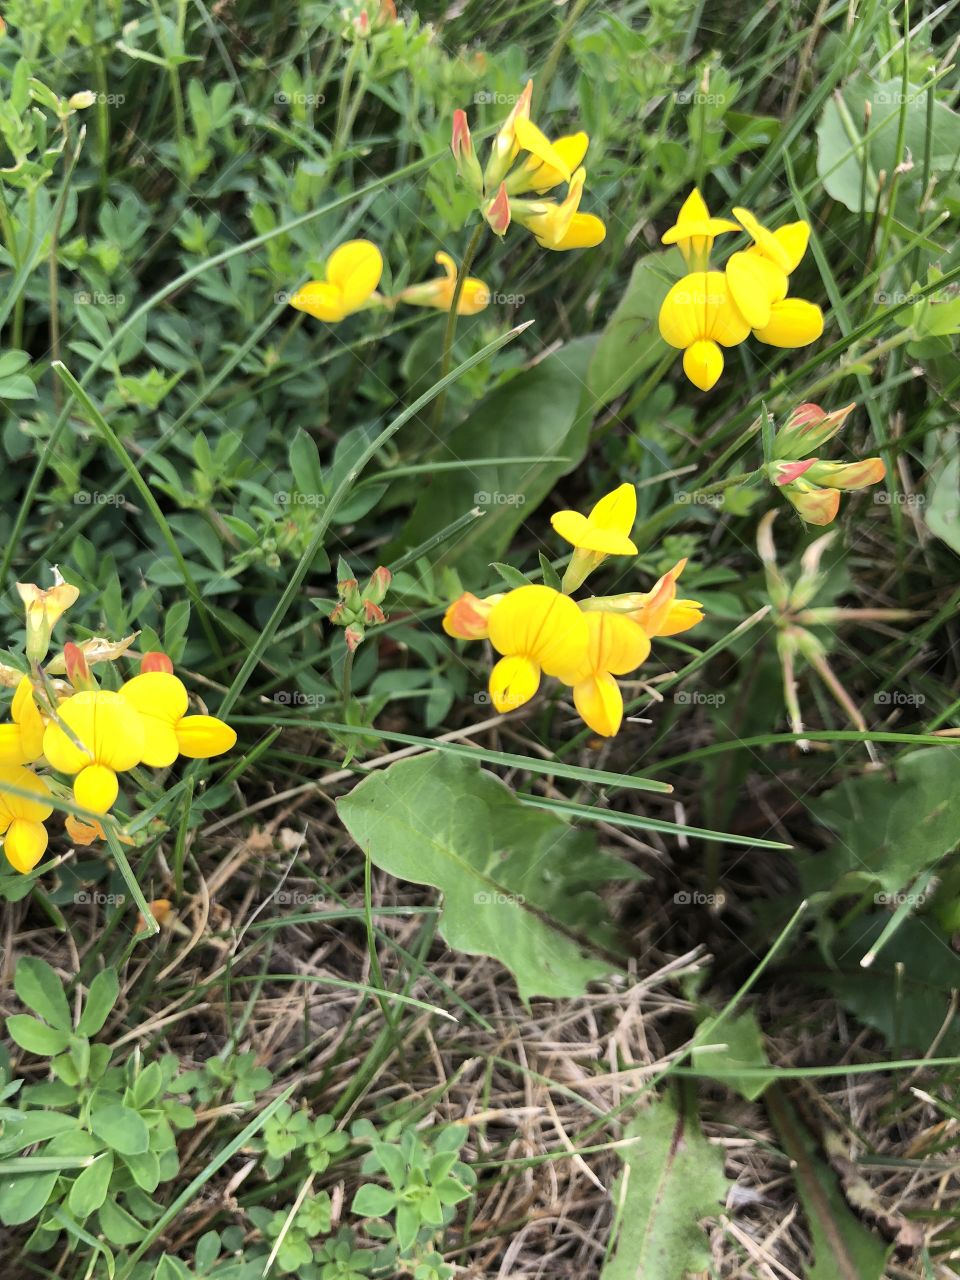 Beautiful day with bright and colorful summer bloom of bright yellow flowers and vibrant green grass. Photos can be used for interior design. These were taken on iPhone 8